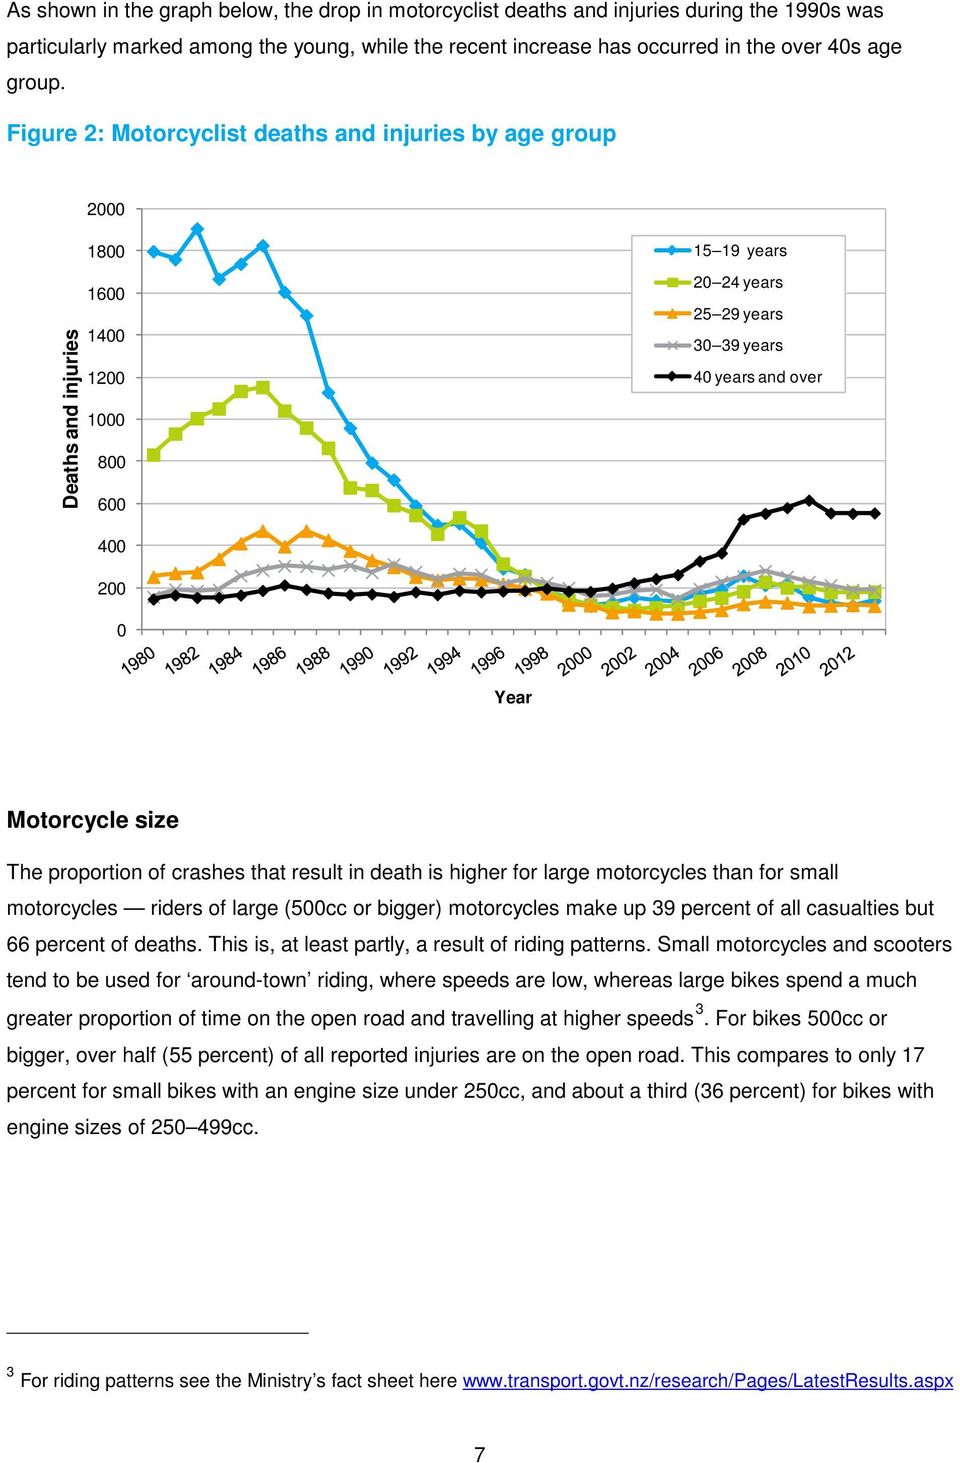 Motorcycle size The proportion of crashes that result in death is higher for large motorcycles than for small motorcycles riders of large (500cc or bigger) motorcycles make up 39 percent of all